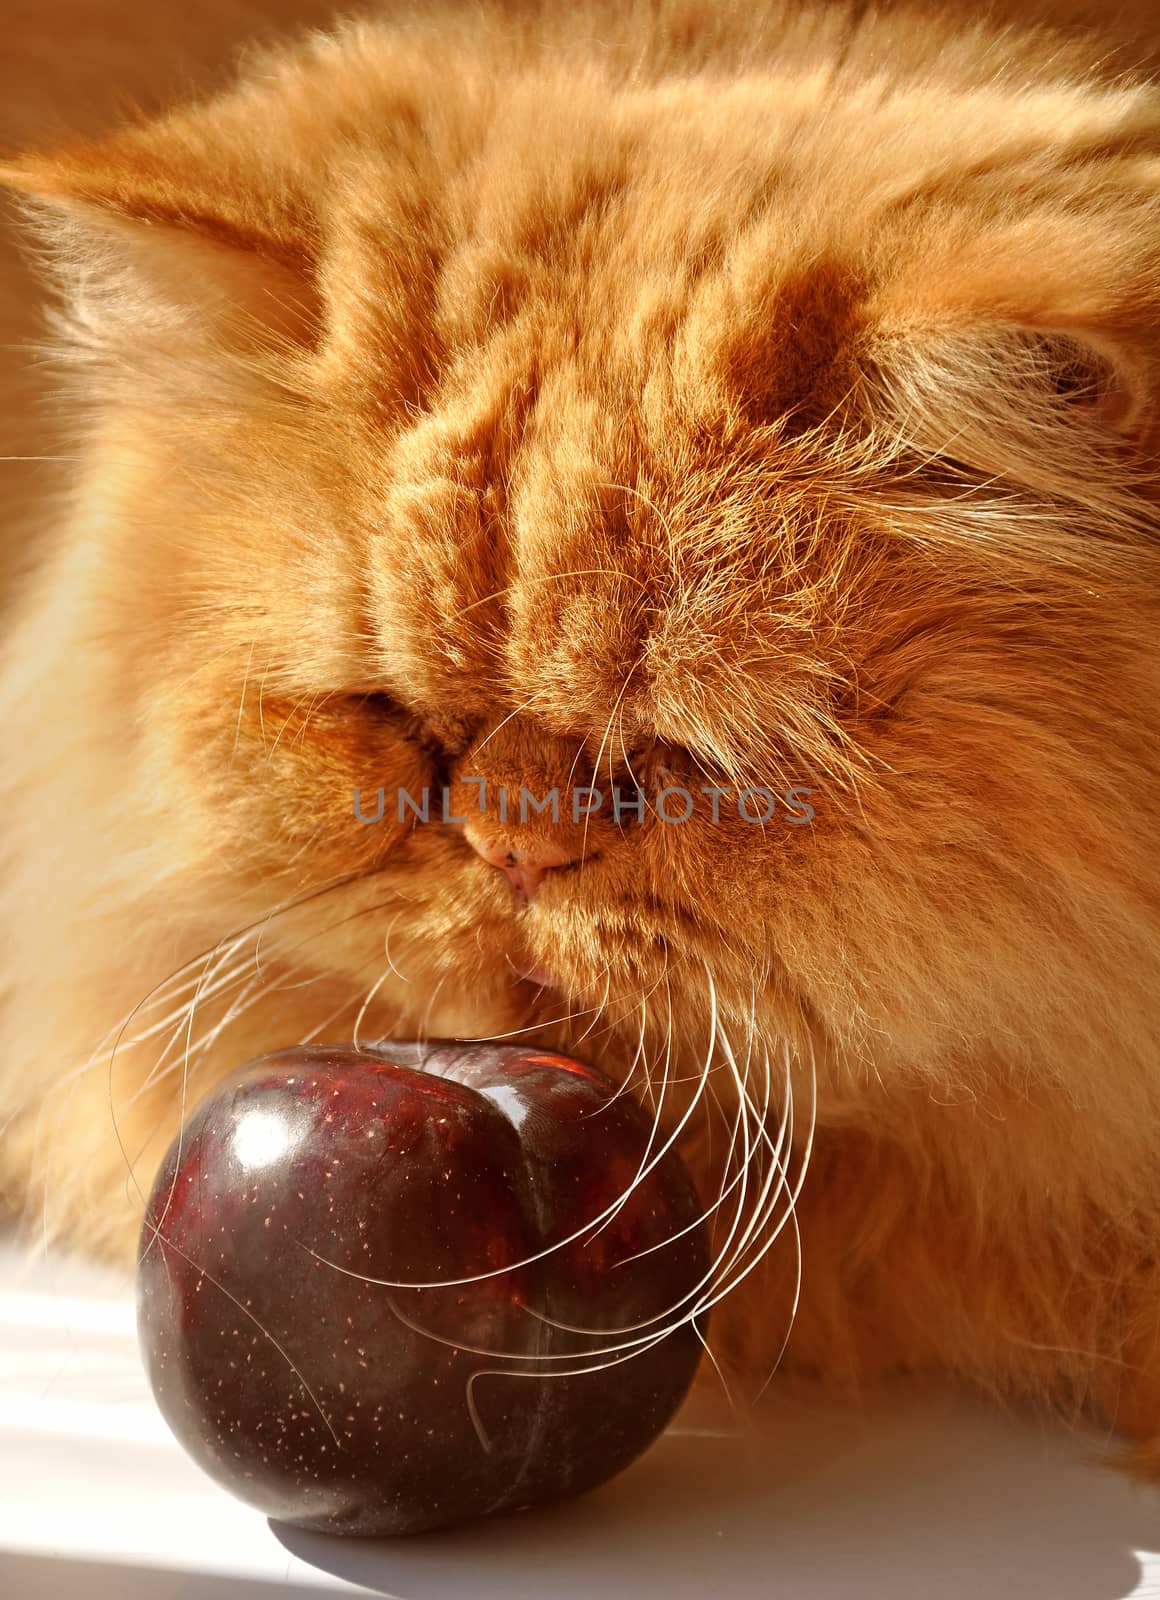 Red fluffy fat Persian cat and plum on the white table